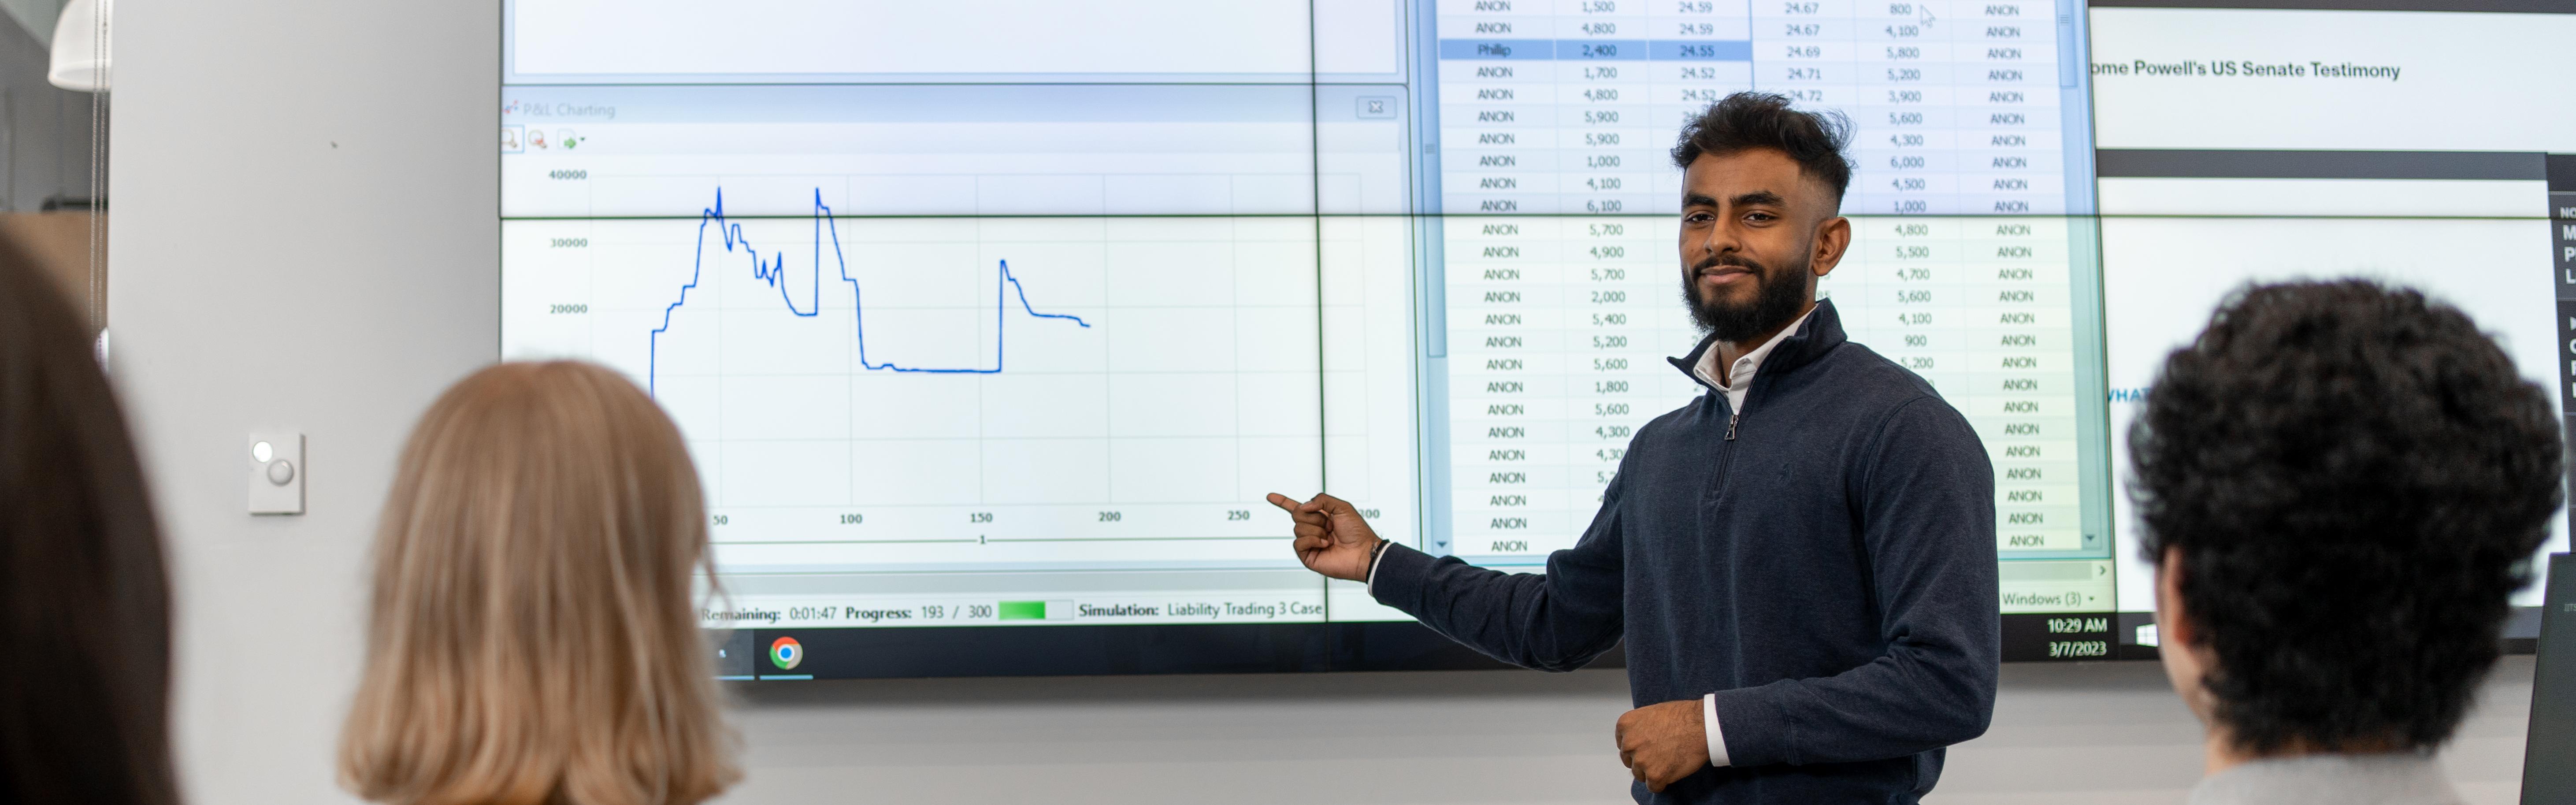 Male student presenting charts and data on a large screen, in front of a classroom of students